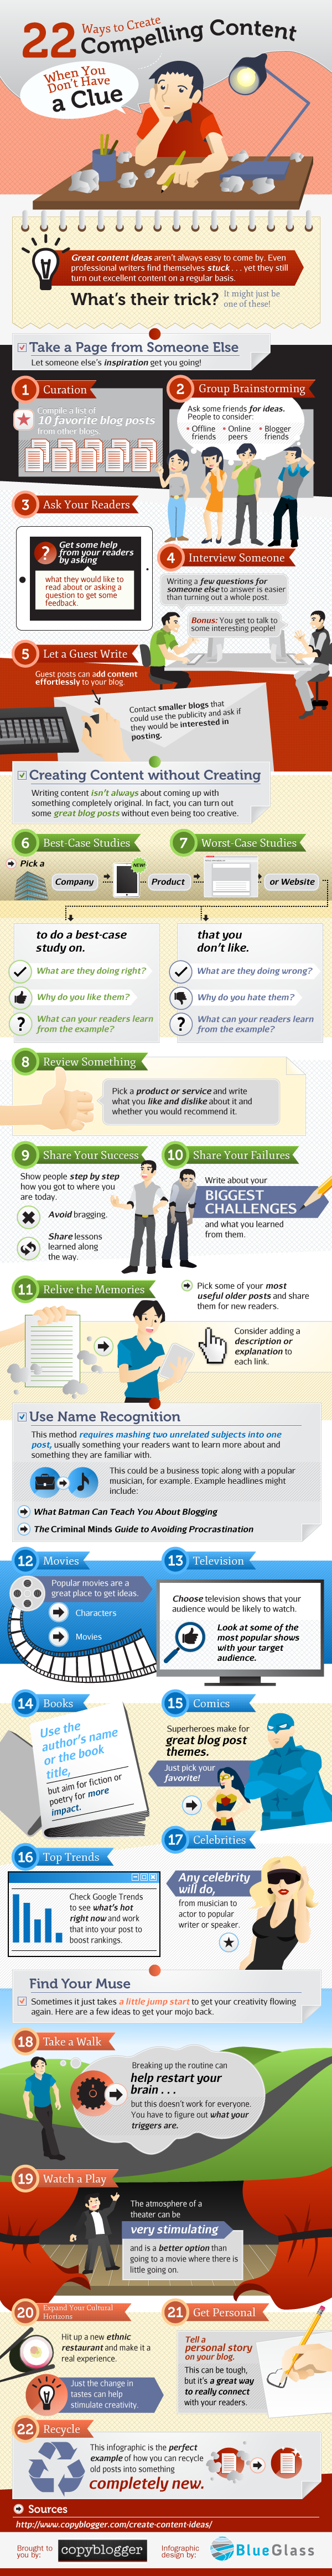 copyblogger infographic create great content